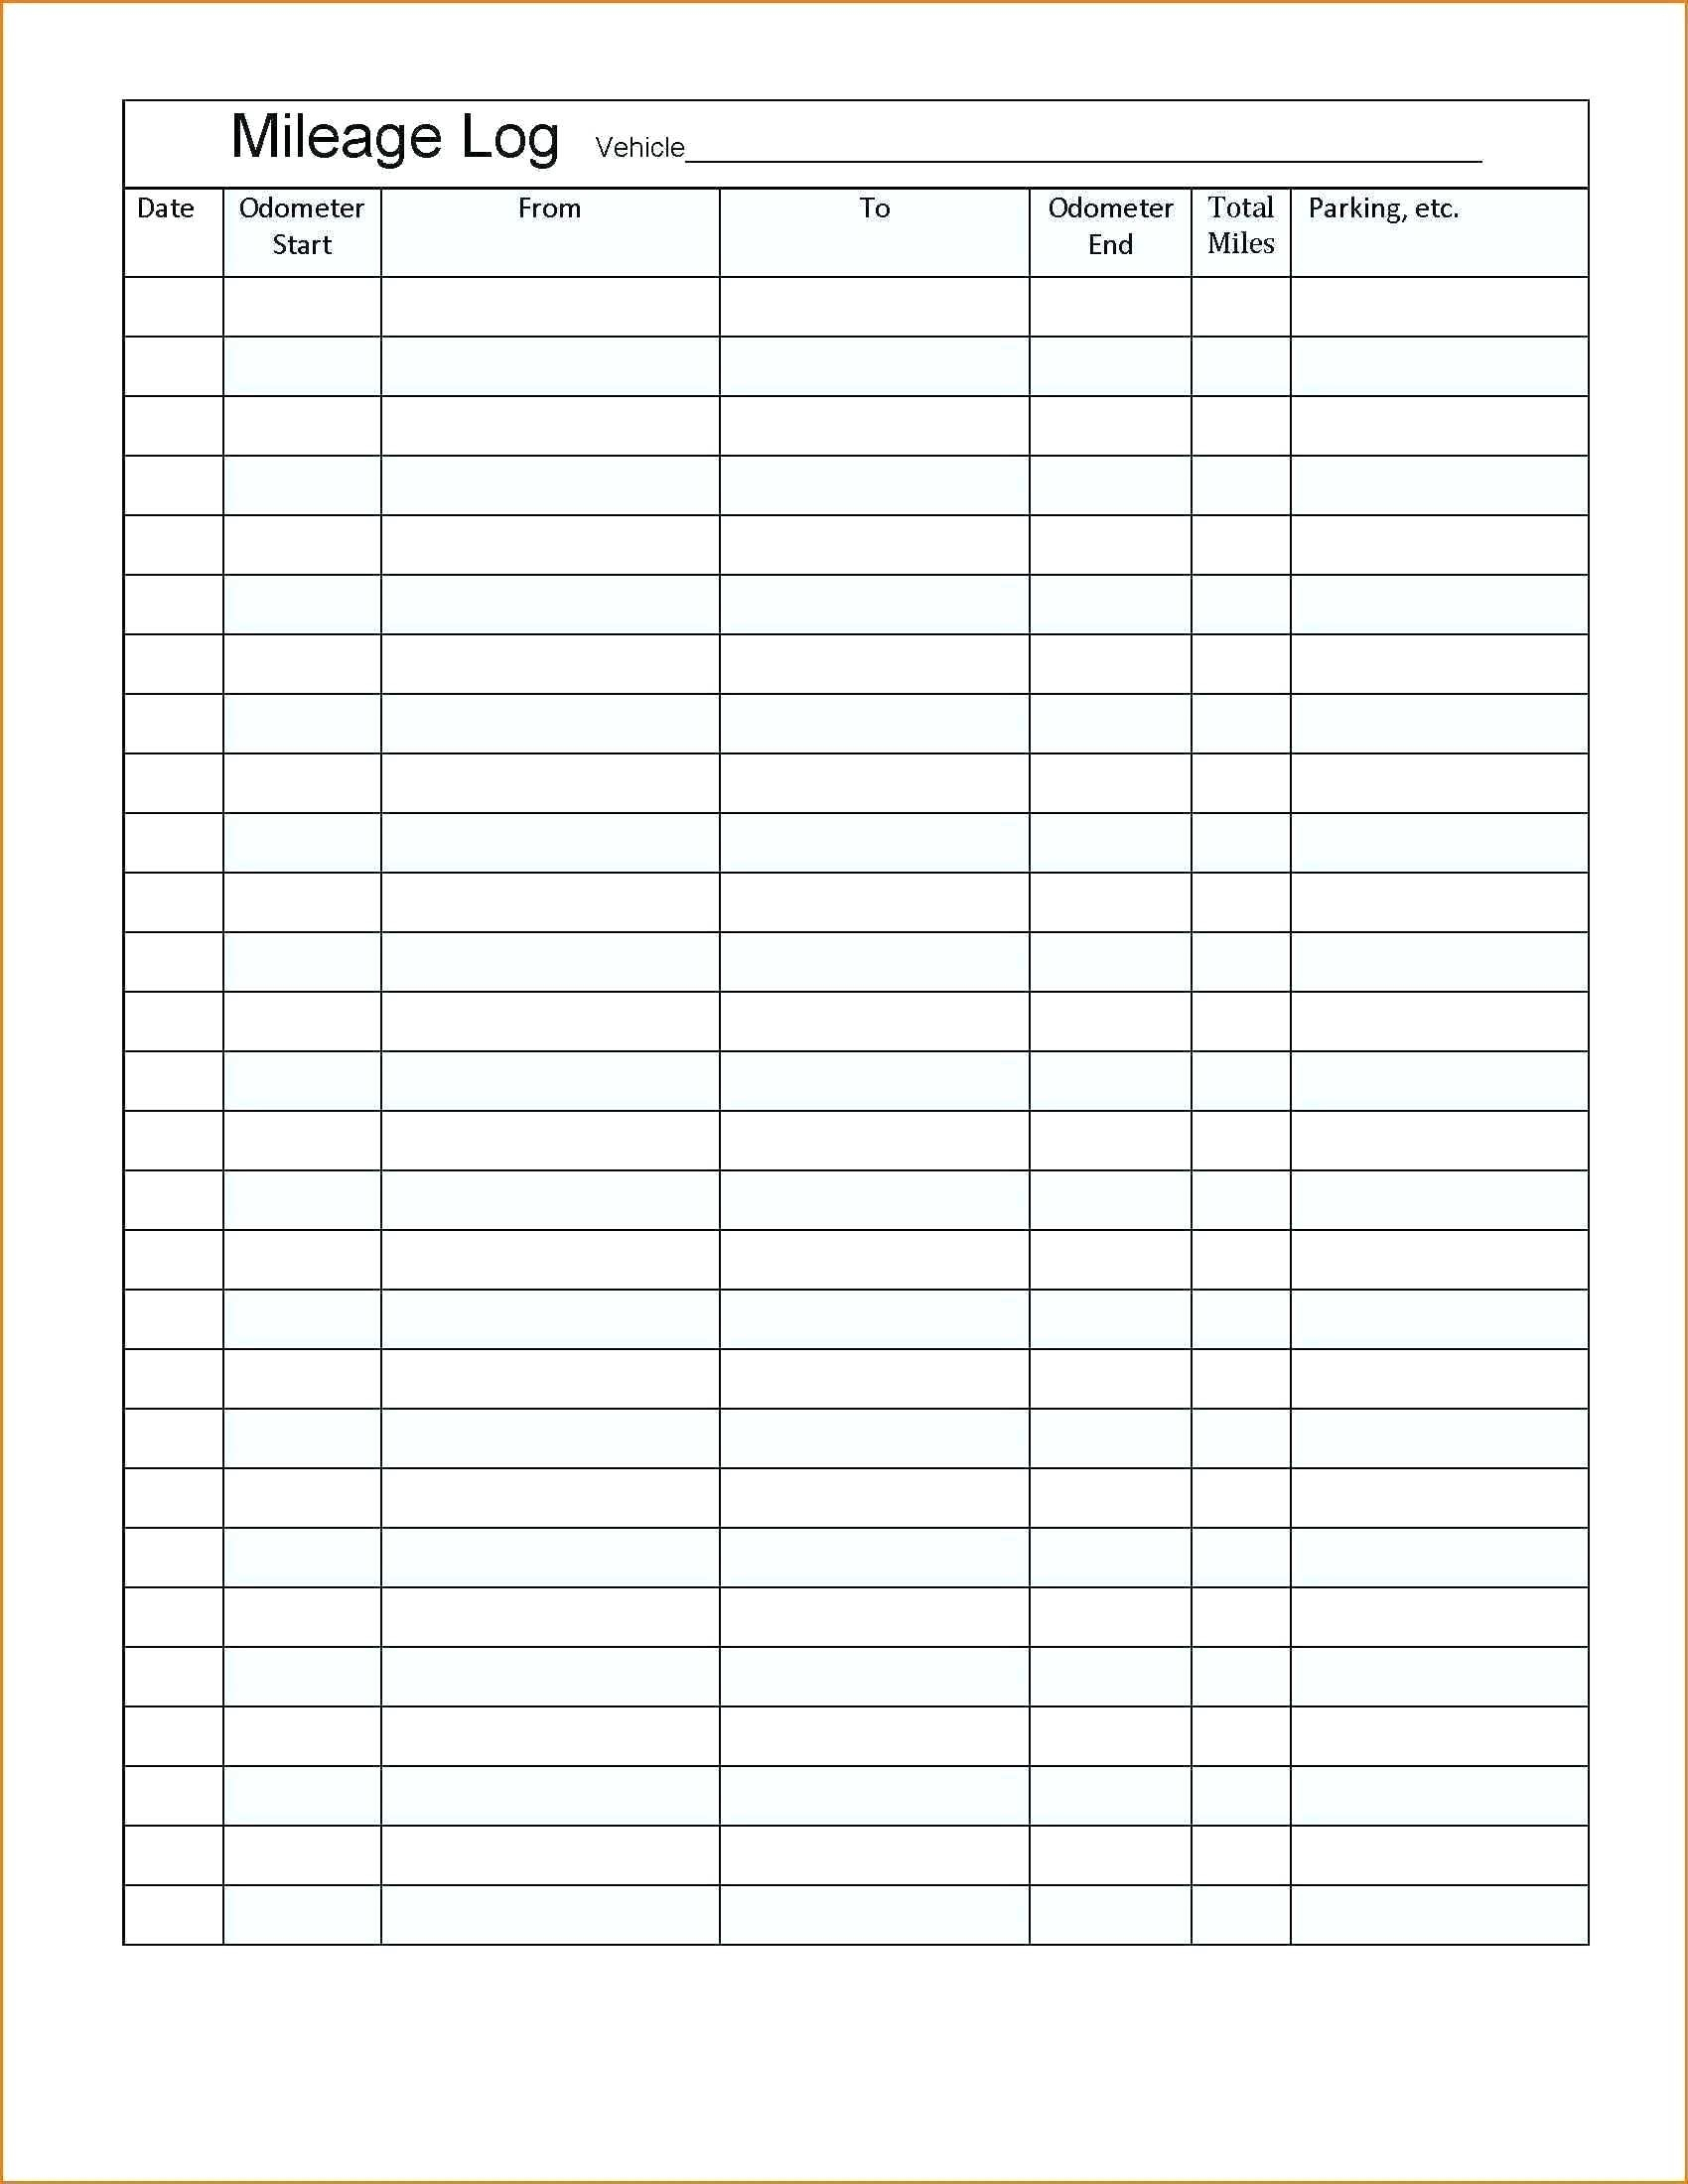 Mileage Log Template for 10 - MileageWise